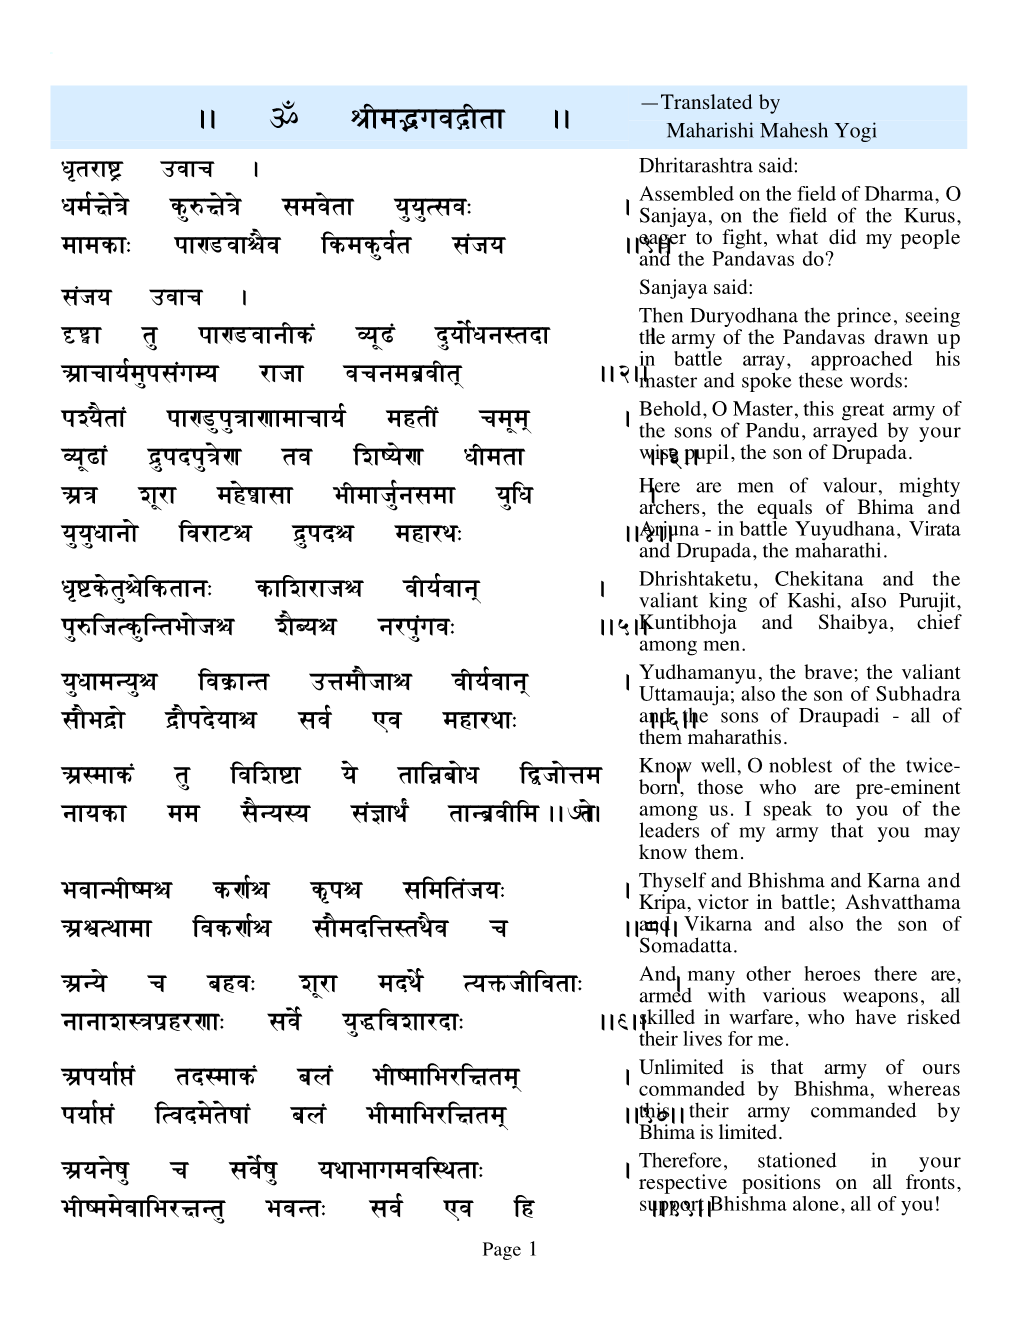 View Sanskrit and English in Pdf Format